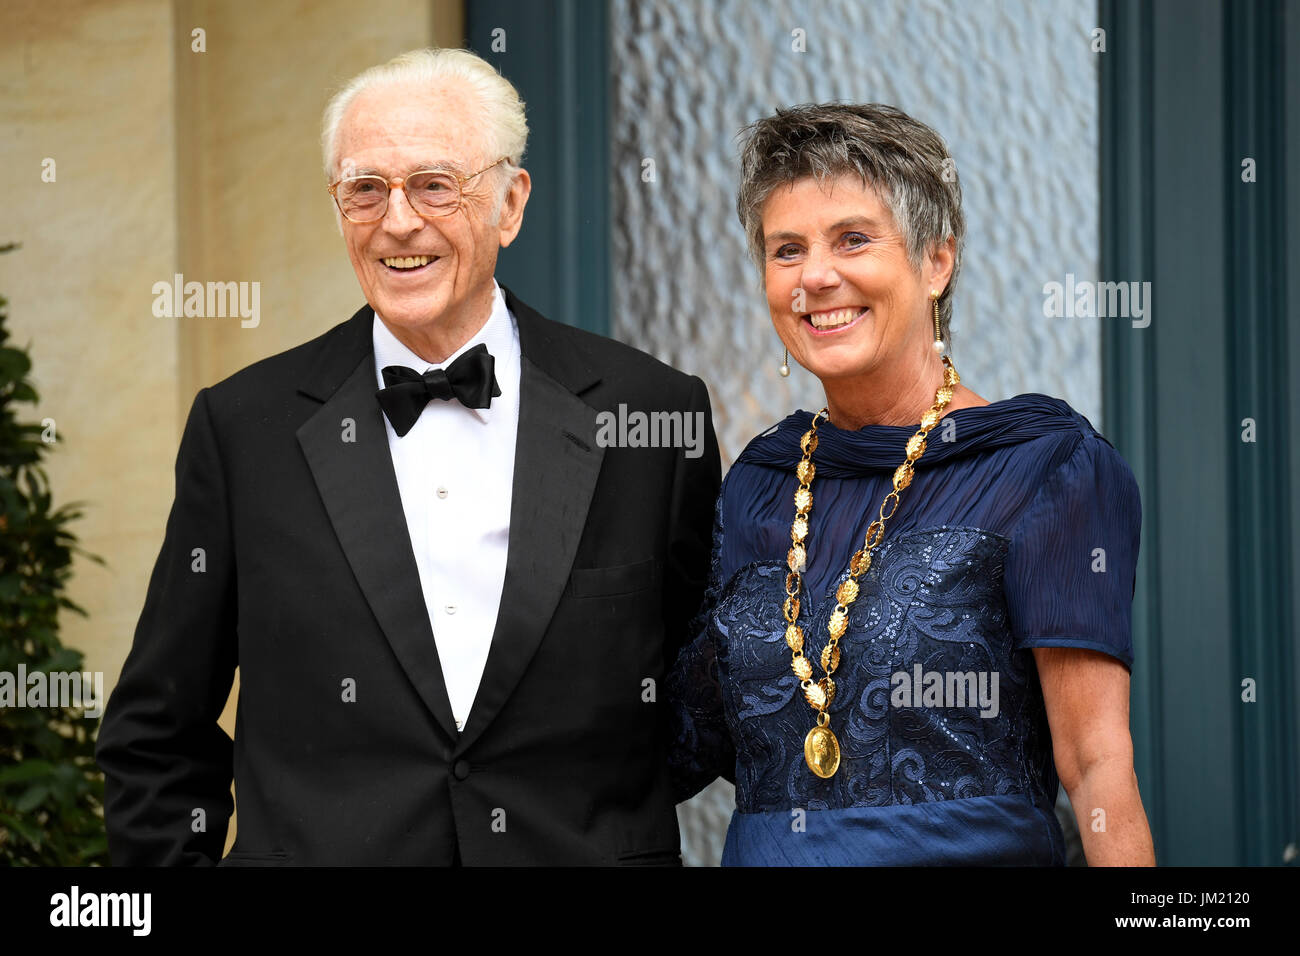 Bayreuth, Germany. 25th July, 2017. The mayor of Bayreuth, Brigitte Merk-Erbe (R) and Franz von Bayern arrive for the opening of the festival in Bayreuth, Germany, 25 July 2017. The Richard Wagner Festival will be opened with the opera 'The Master-Singers of Nuremberg'. Photo: Tobias Hase/dpa/Alamy Live News Stock Photo